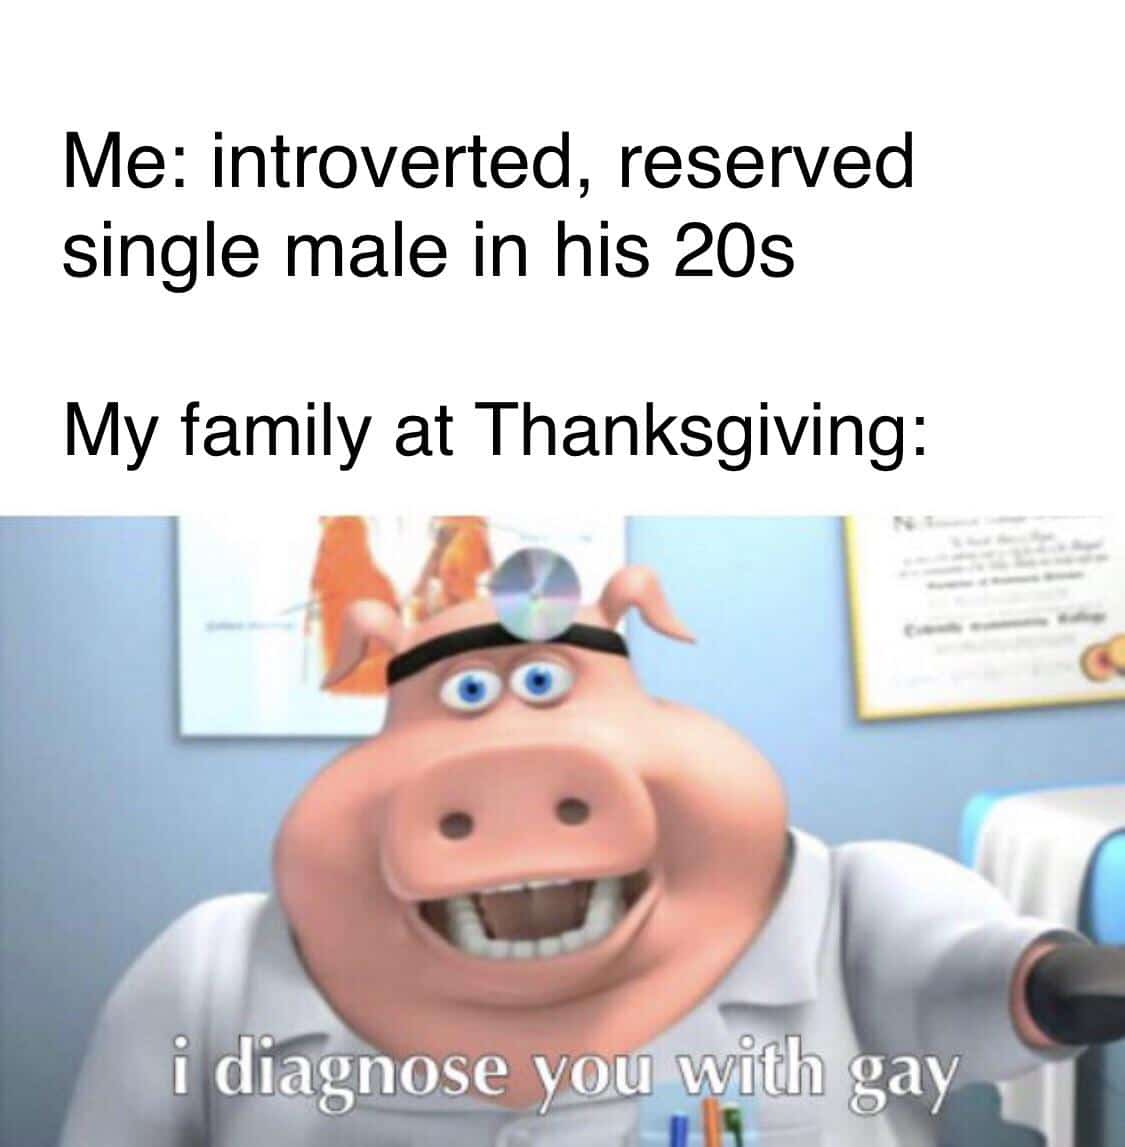 Dank Meme dank-memes cute text: Me: introverted, reserved single male in his 20s My family at Thanksgiving: 'i diagnose you with gay -qt 